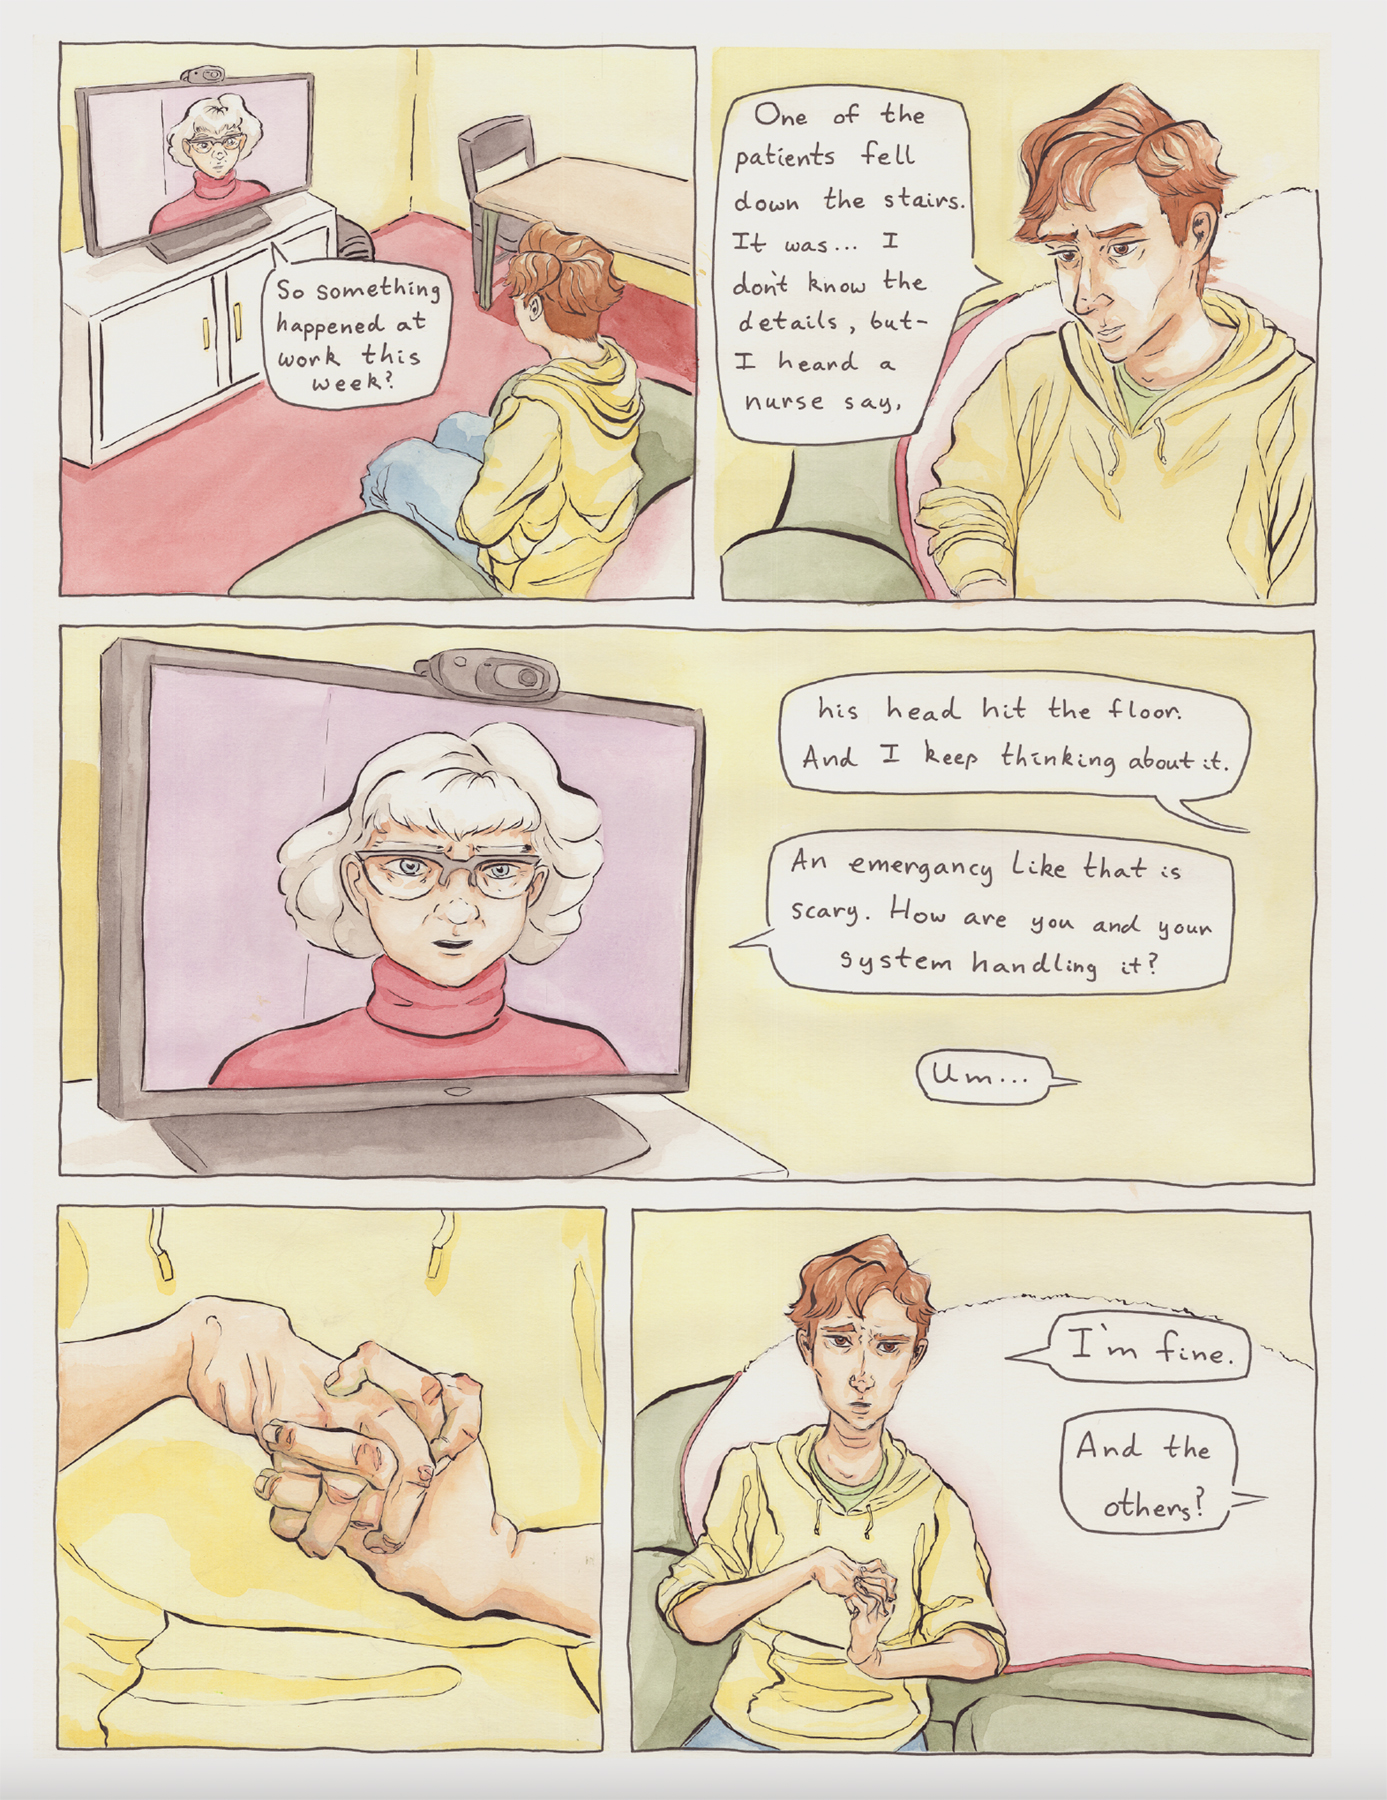 Page of comic depicting a video conference between main character and another person where the main character recounts a patient falling down the stairs. The listener asks how the main character's system is handling it. Image courtesy of Daniell Stromanthe